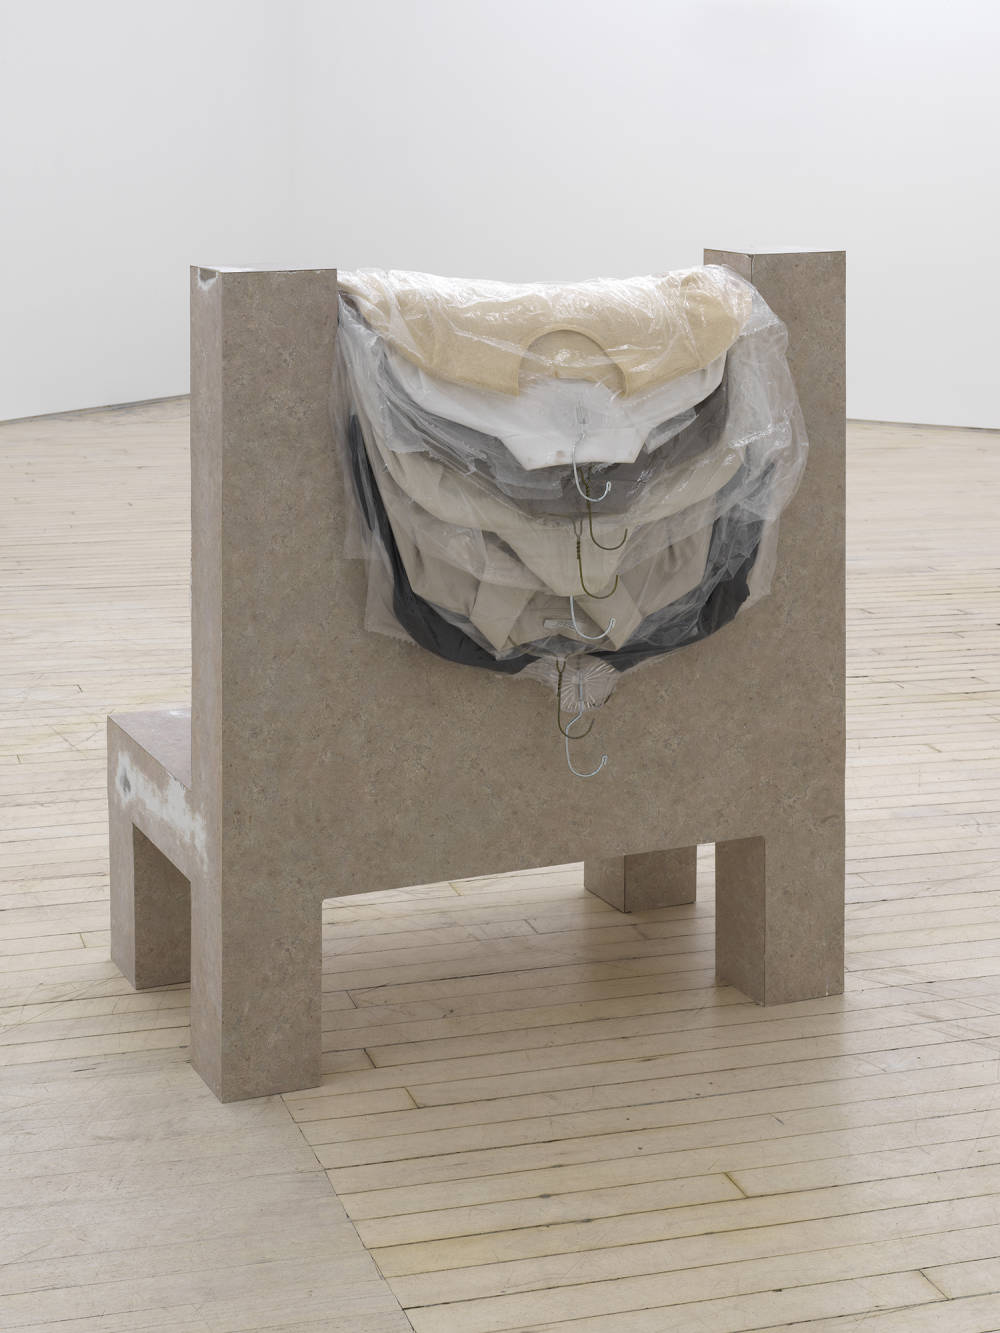 In a gallery space, a sculpture rests in the center of the room. The object resembles an architectural structure with several pale colored shirts in dry cleaning bags draped over the top. 